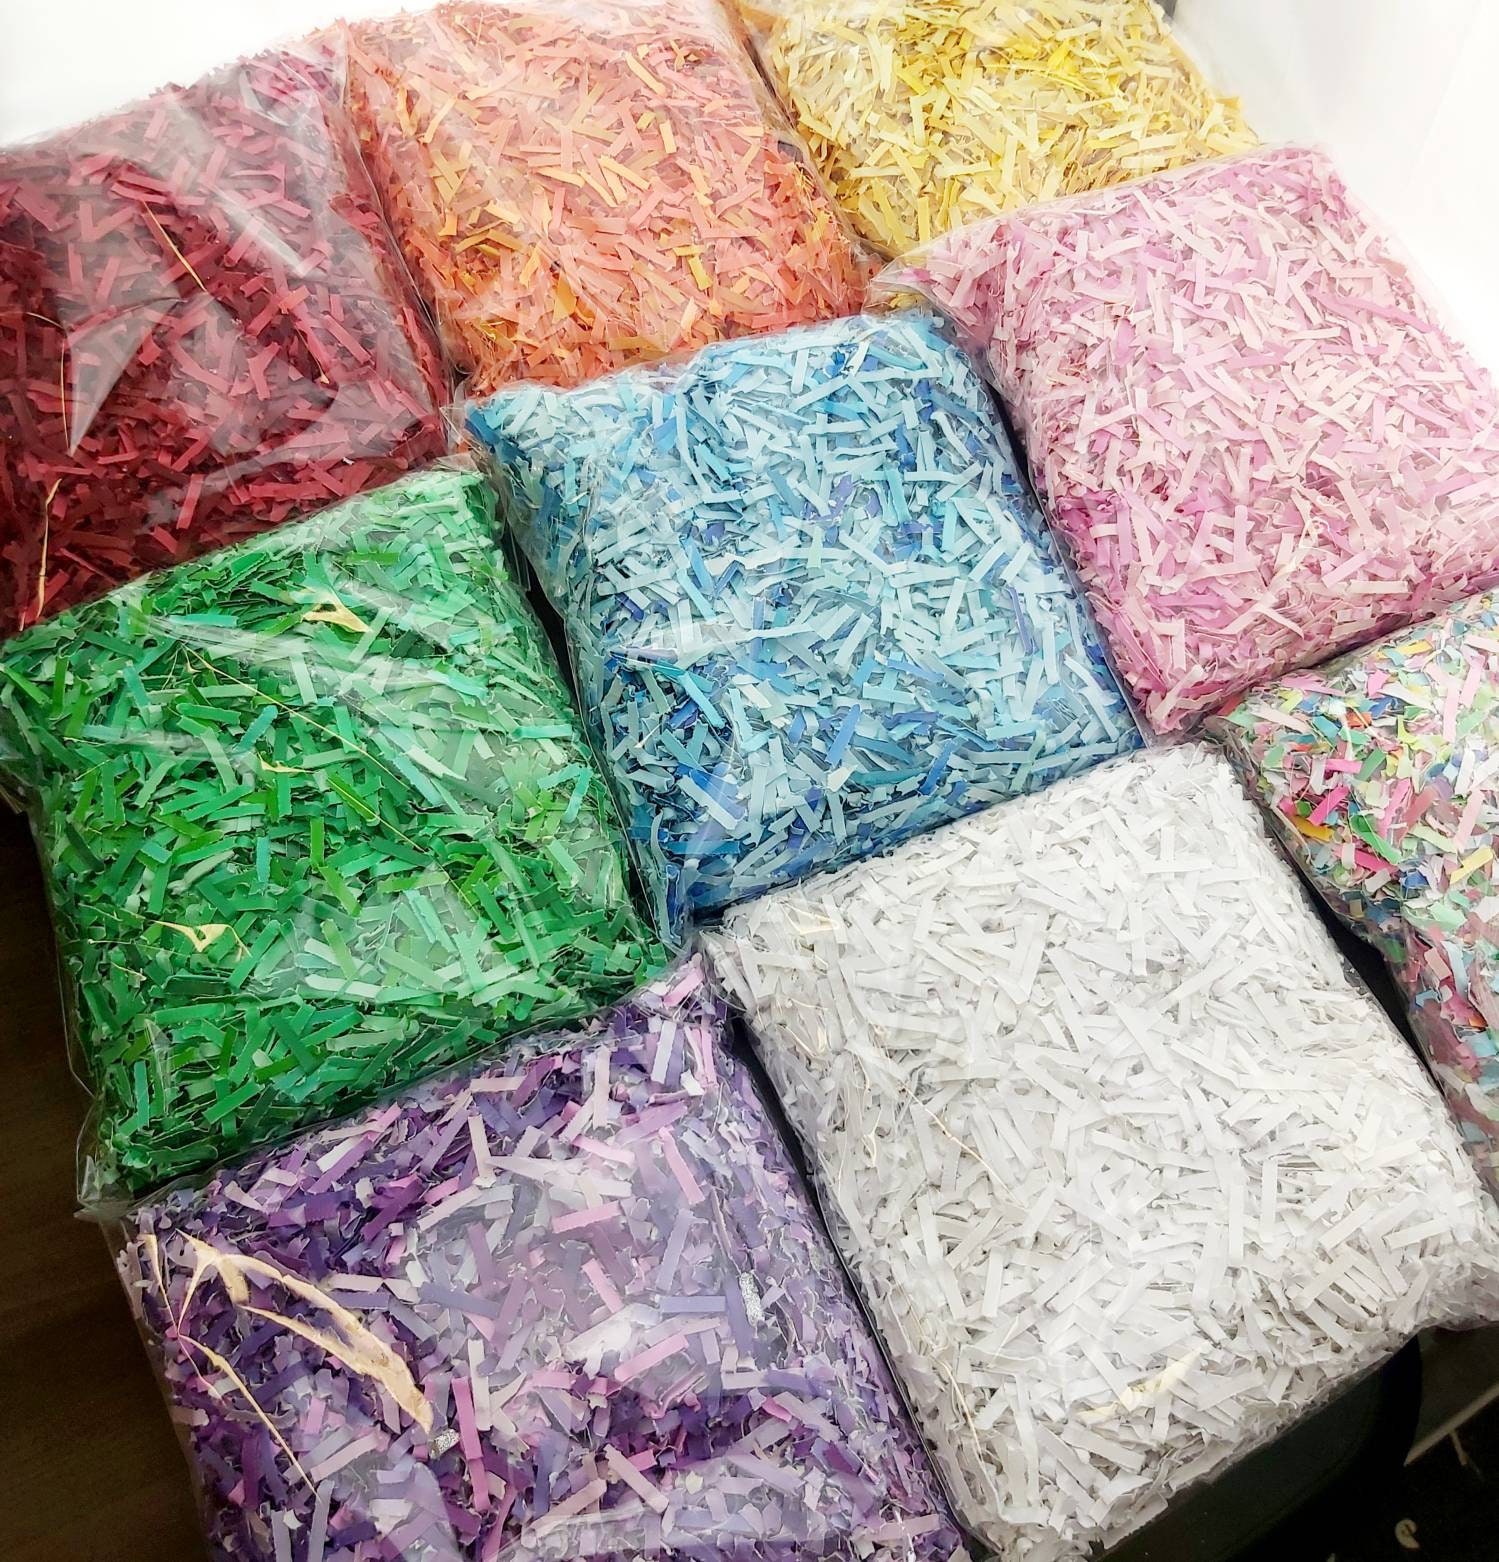 Shredded Paper Gift Box Filler Colorful Wedding Birthday Party Gift  Packaging Decor Crinkle Cut Paper Shred Packaging Gift Bag - AliExpress